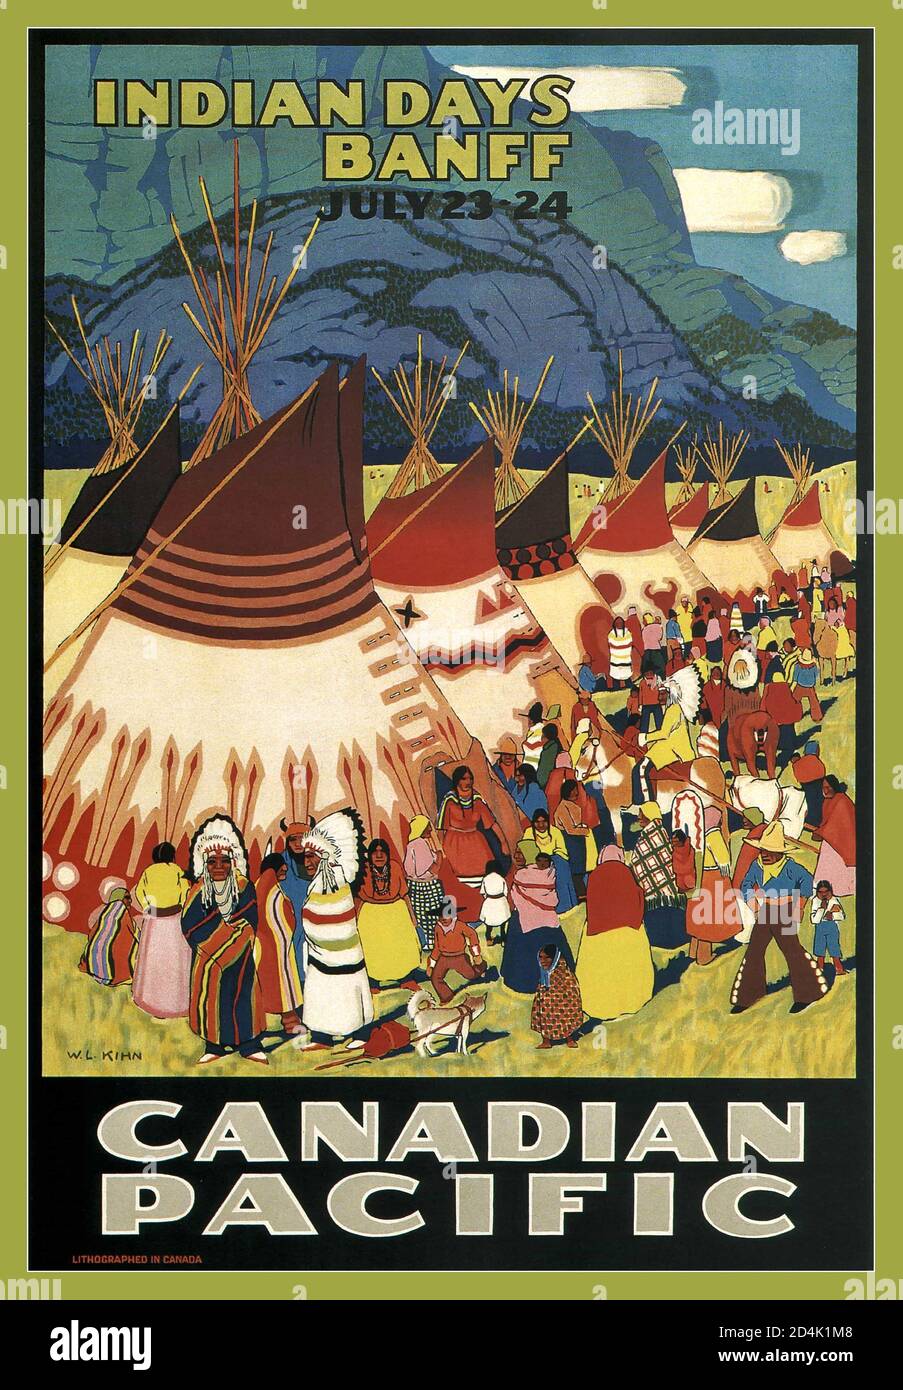 Vintage Railway Poster 1925  INDIAN DAYS BANFF W. Langdon Kihn  Canadian Pacific Railway Advertising Poster published in 1925. Banff Alberta Canada Stock Photo